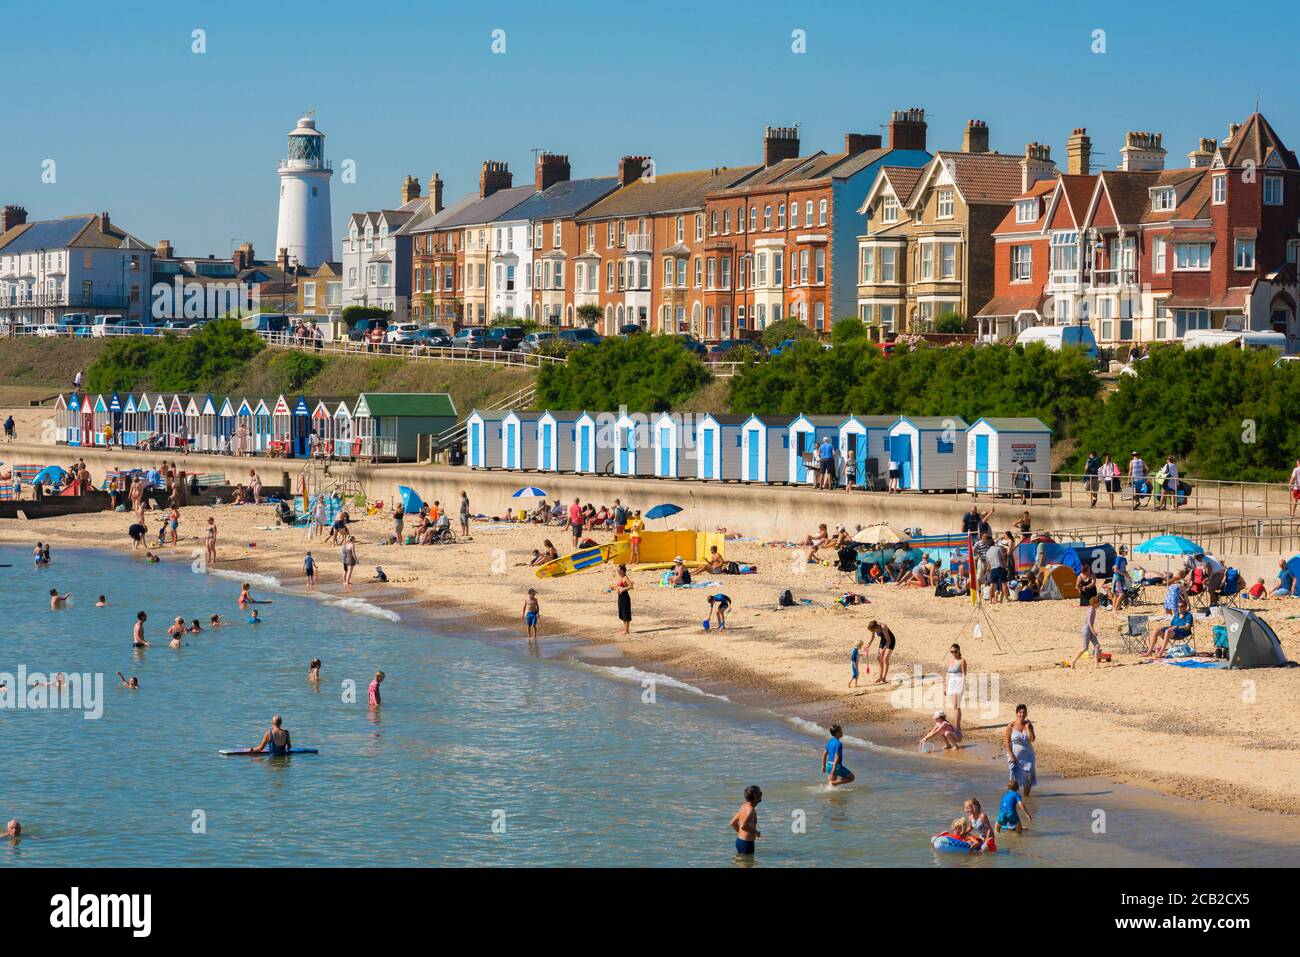 UK beach summer, view in summer of people enjoying a day on the beach in Southwold, Suffolk, England, UK Stock Photo